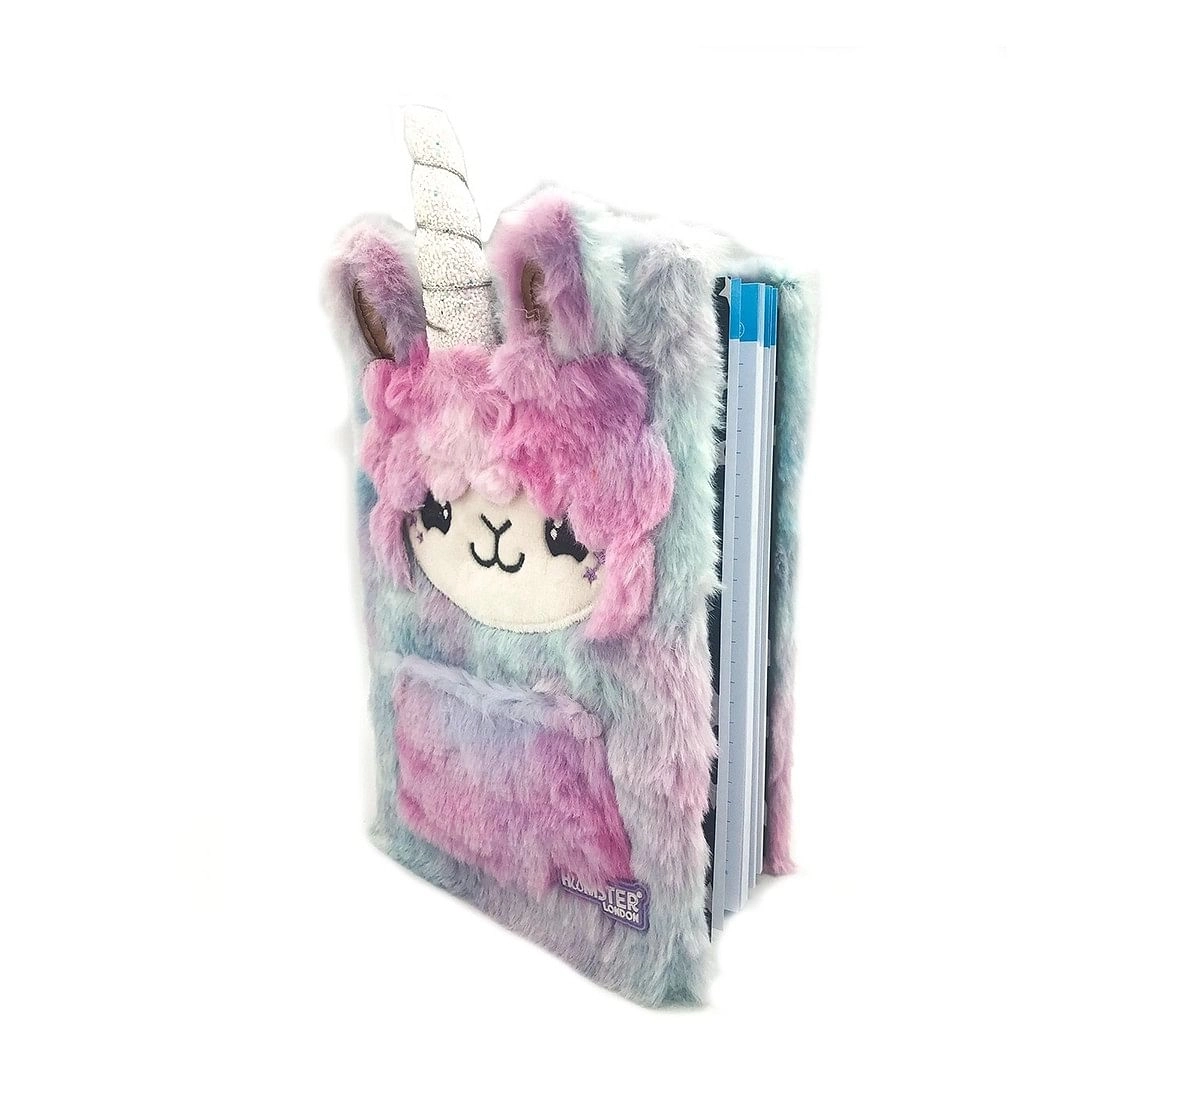 Hamster London Llama Diary for Kids age 3Y+ (Pink)